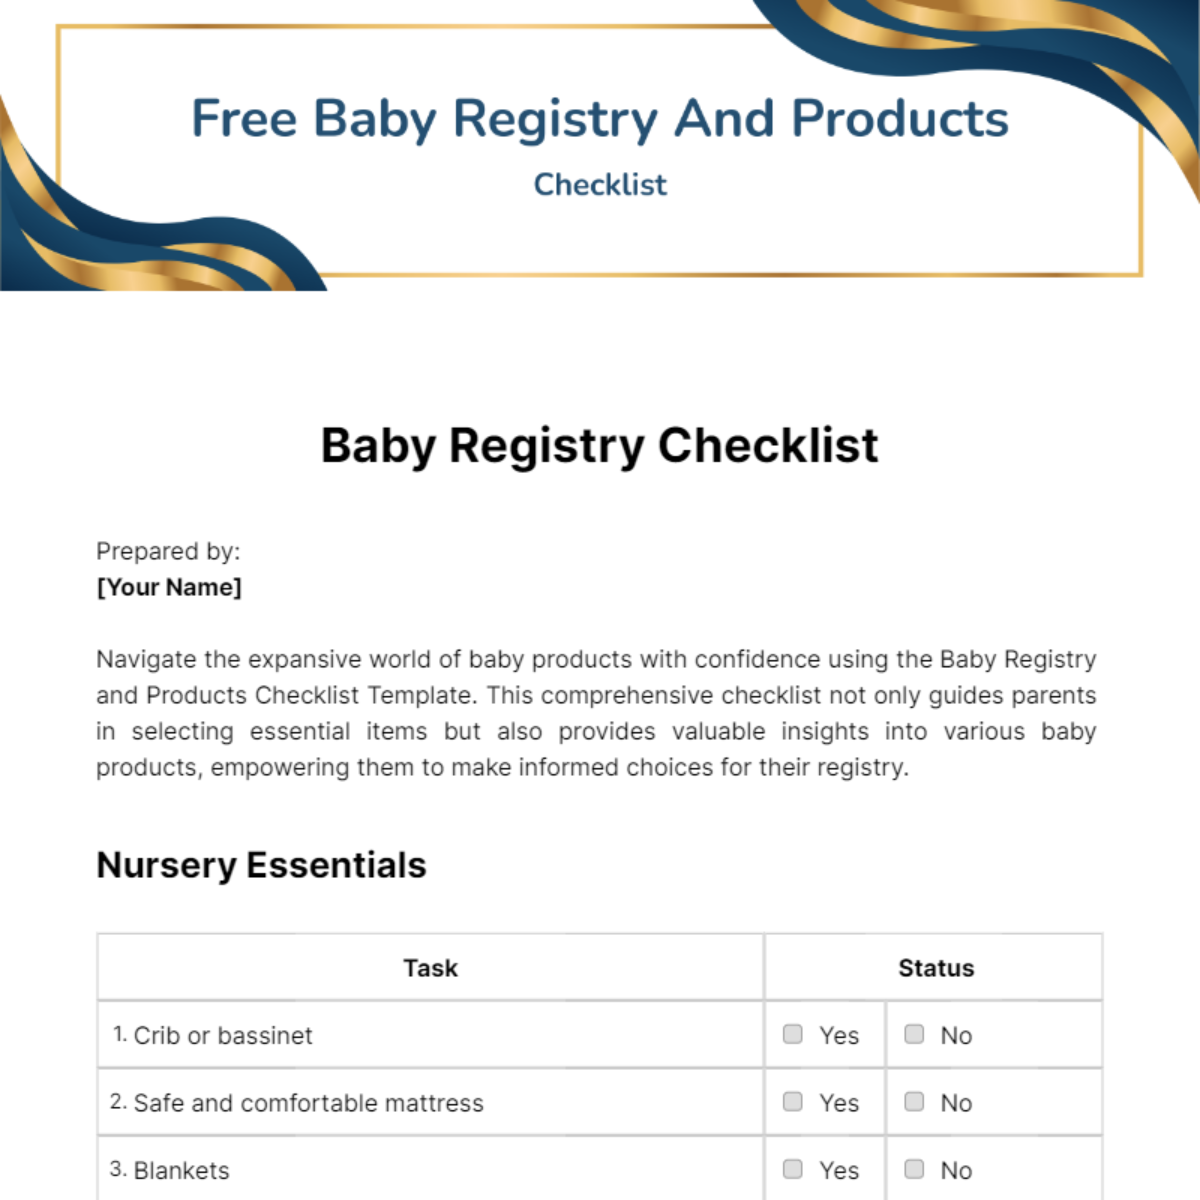 Baby Registry And Products Checklist Template